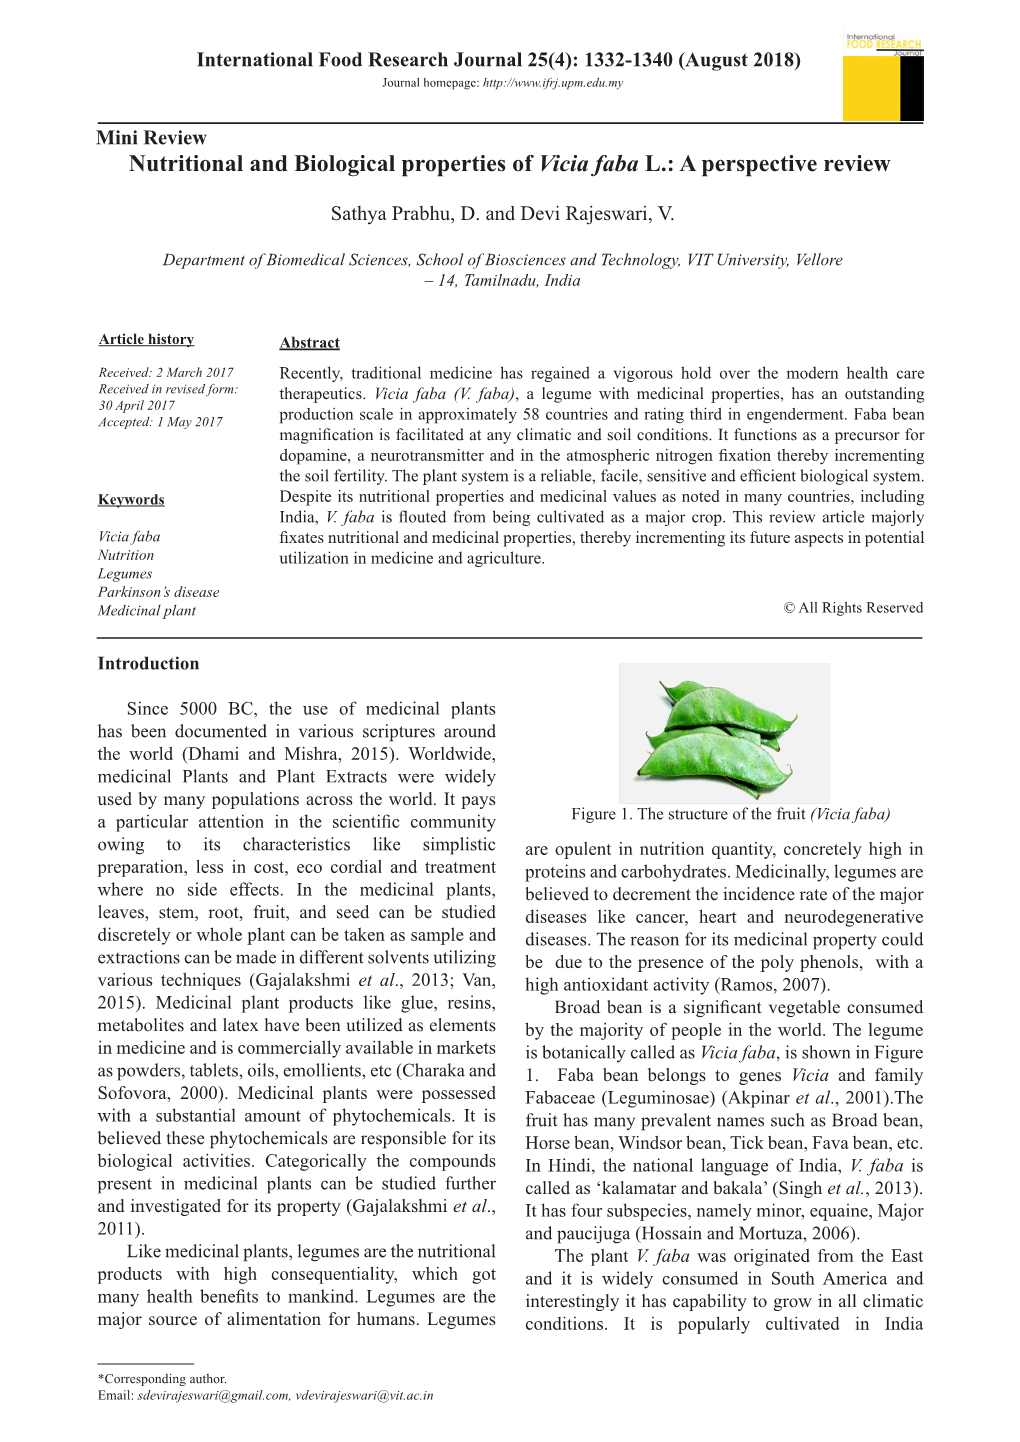 Nutritional and Biological Properties of Vicia Faba L.: a Perspective Review